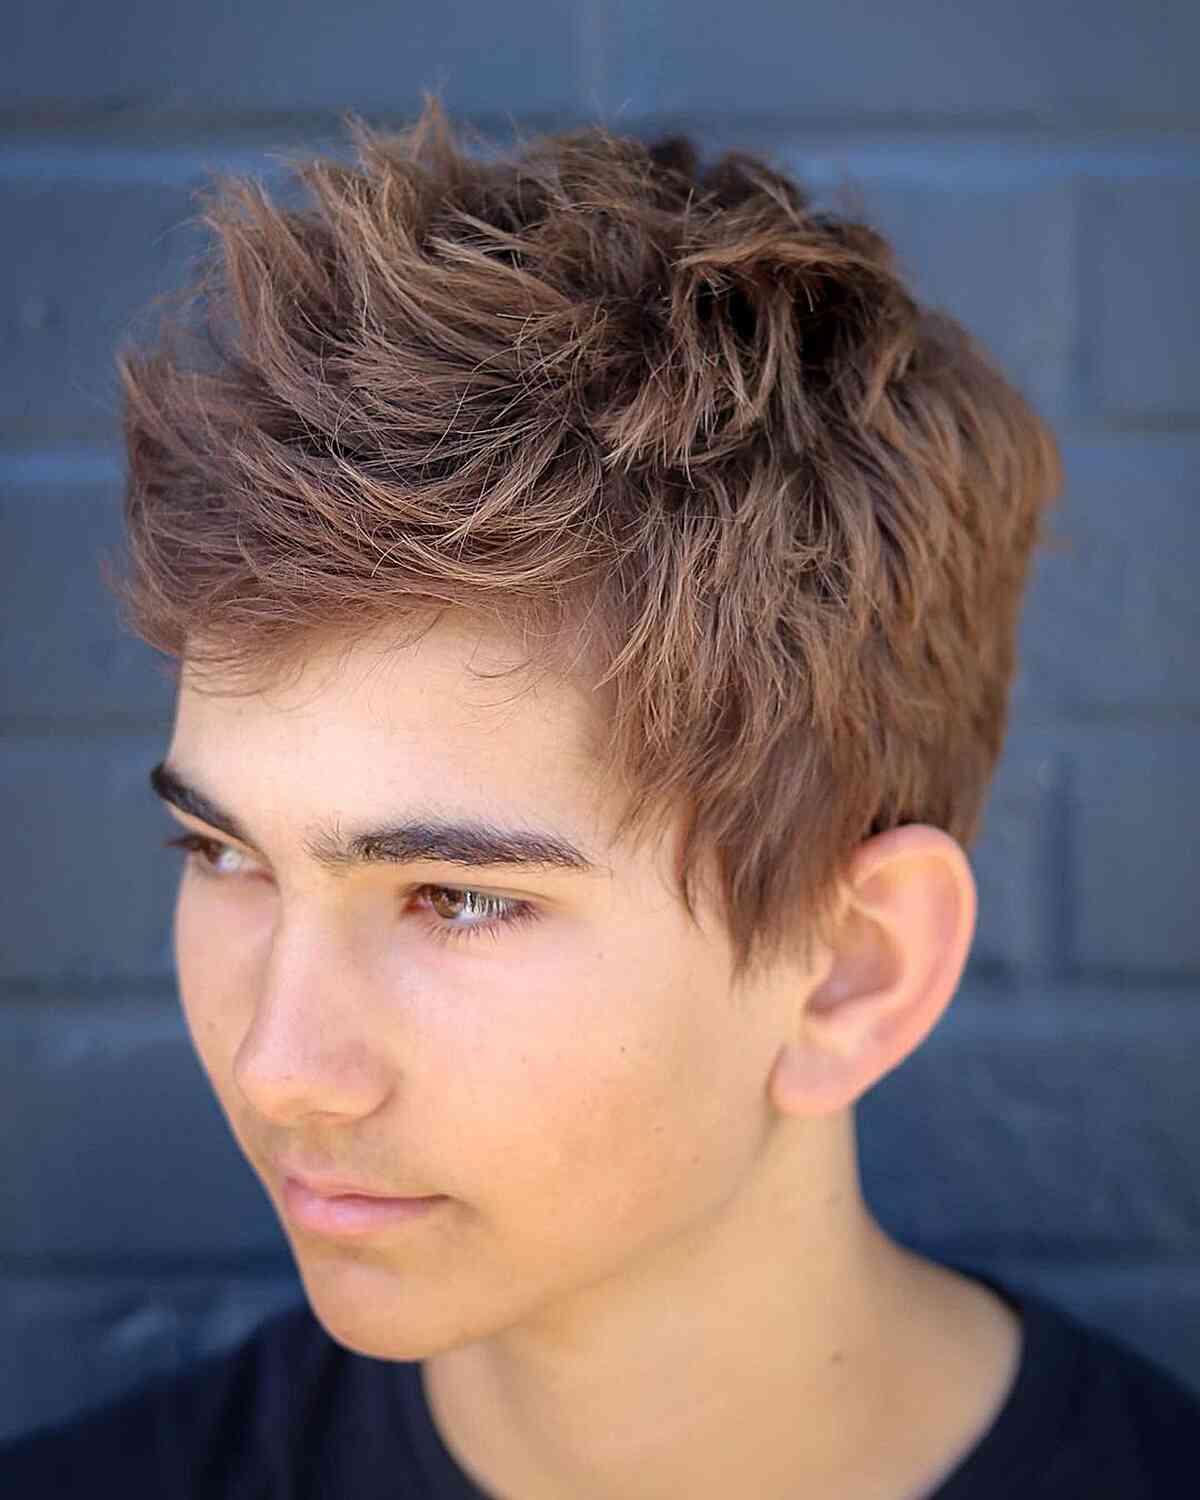 Messy Cut with Texture for Teen Guys with short thick hair